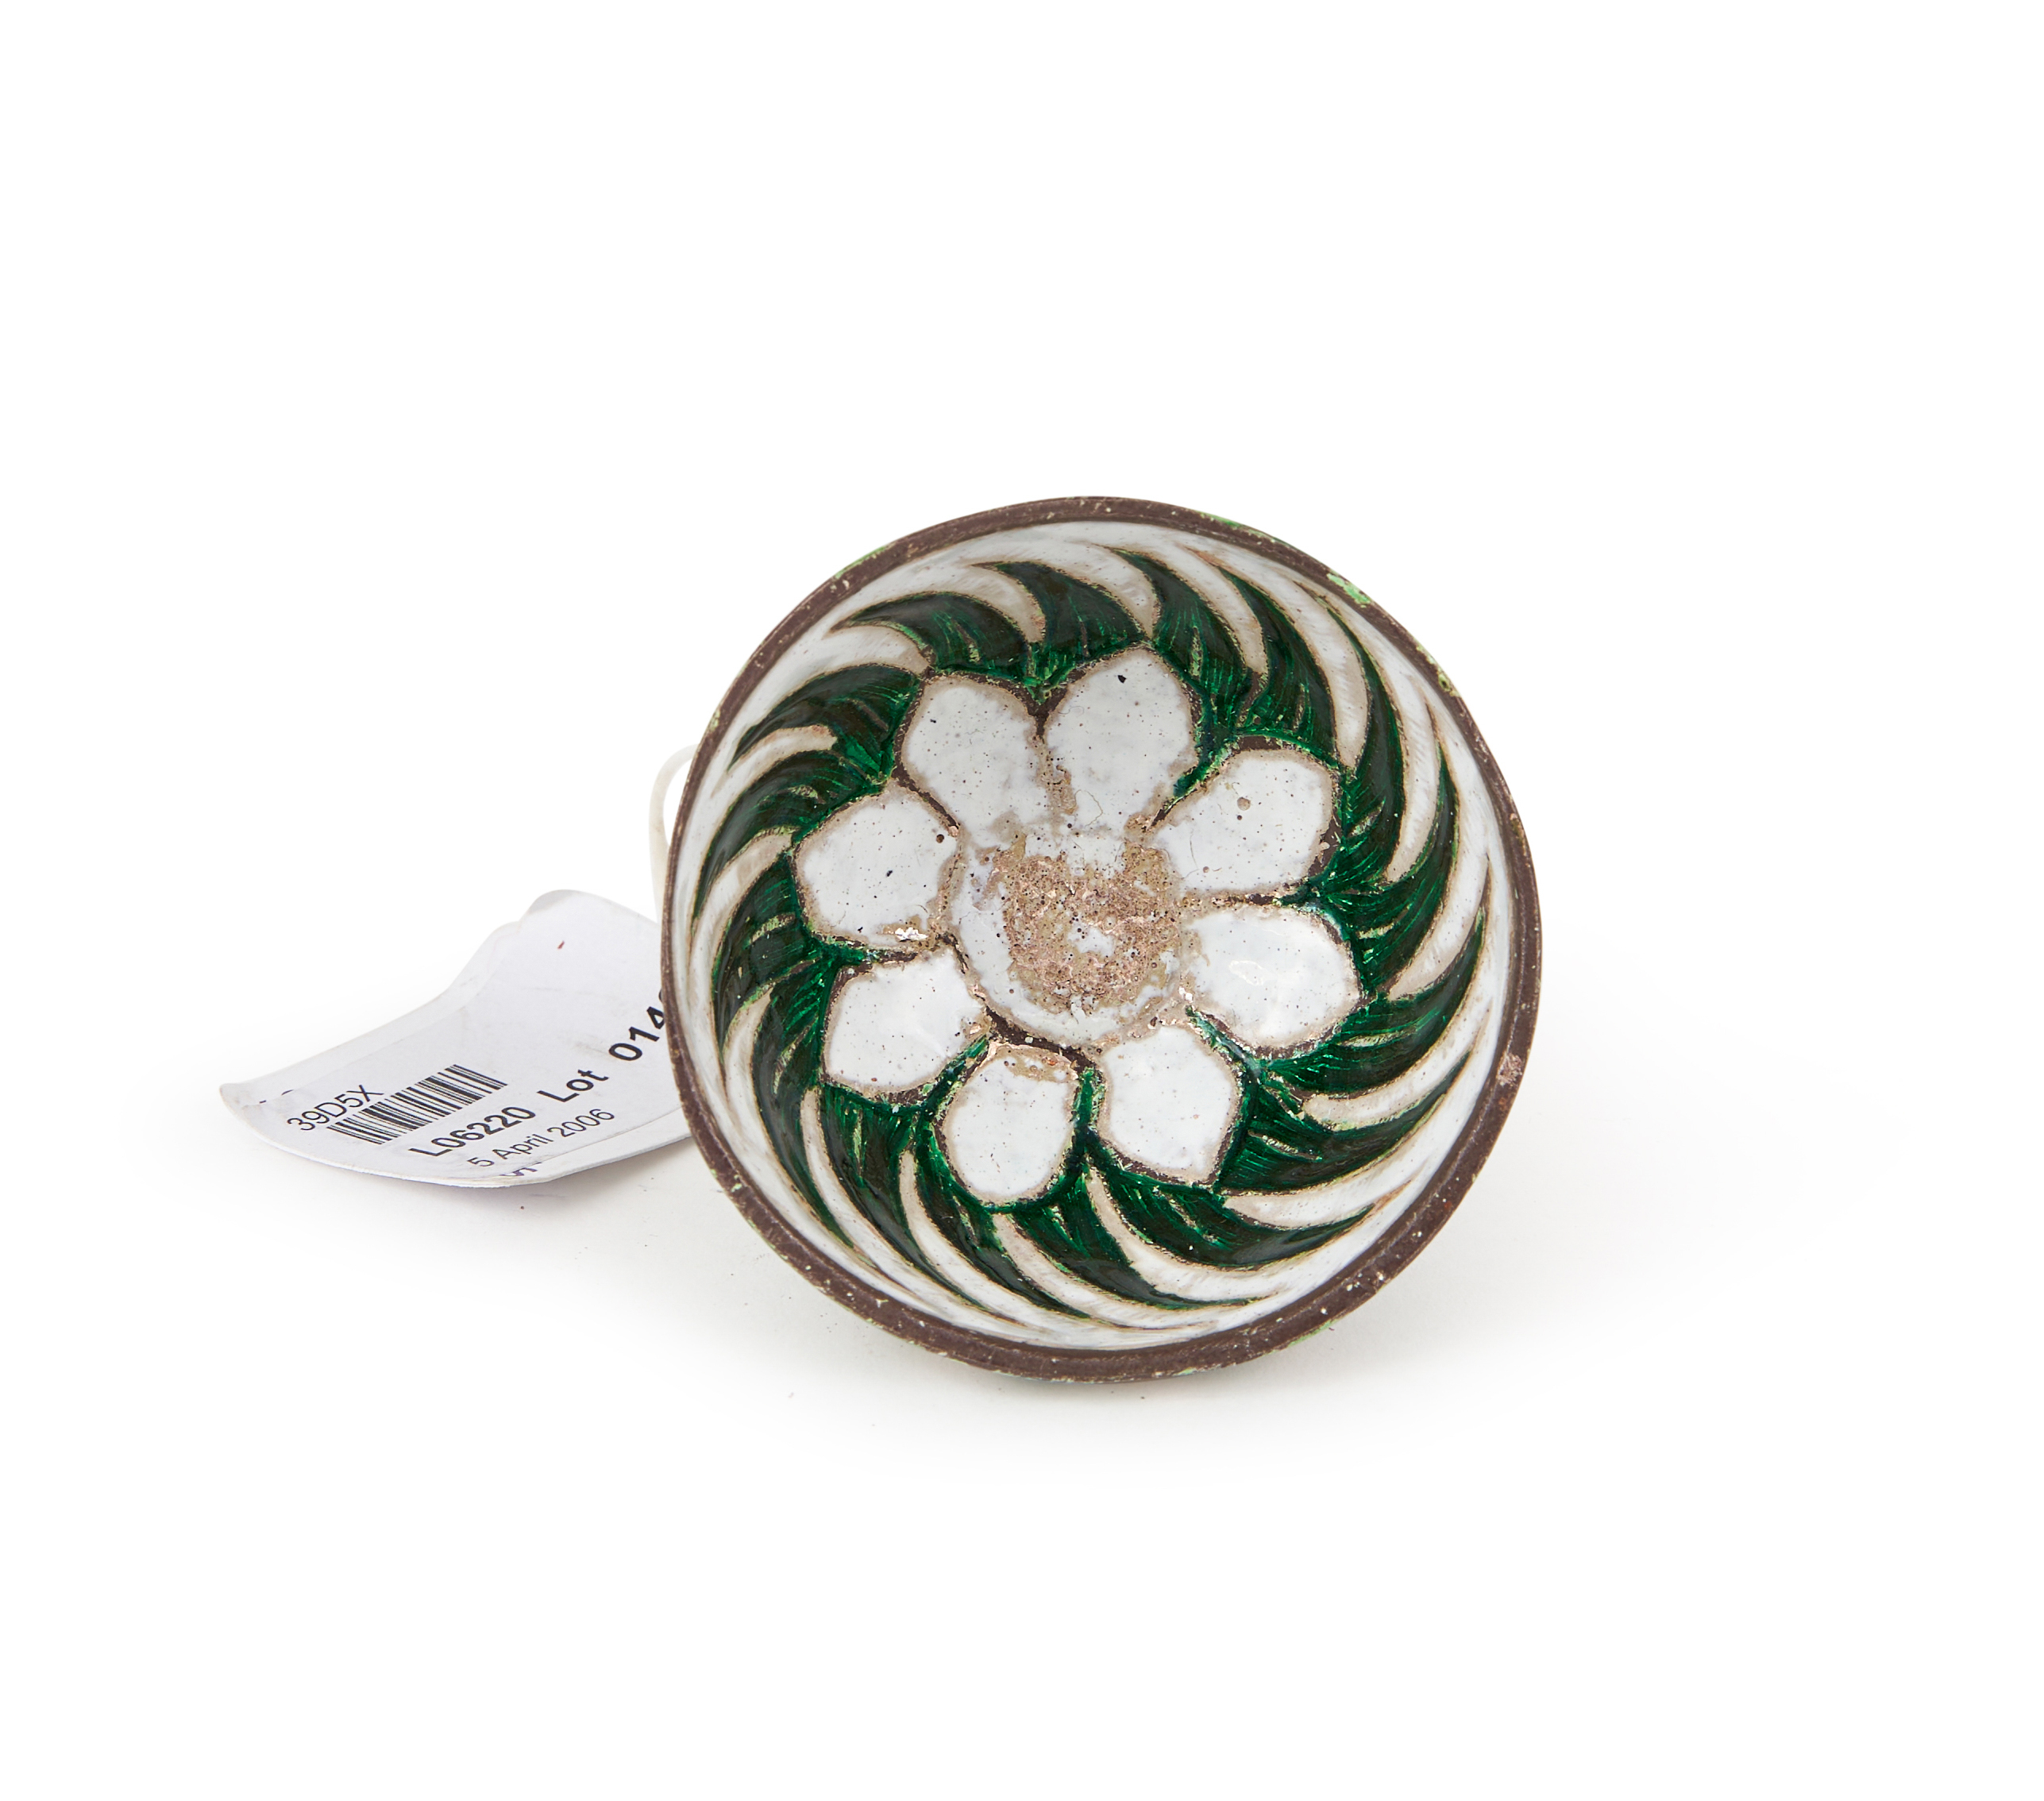 A ROYAL GREEN & WHITE ENAMELLED MUGHAL WINE CUP, 17TH CENTURY, INDIA - Image 4 of 5